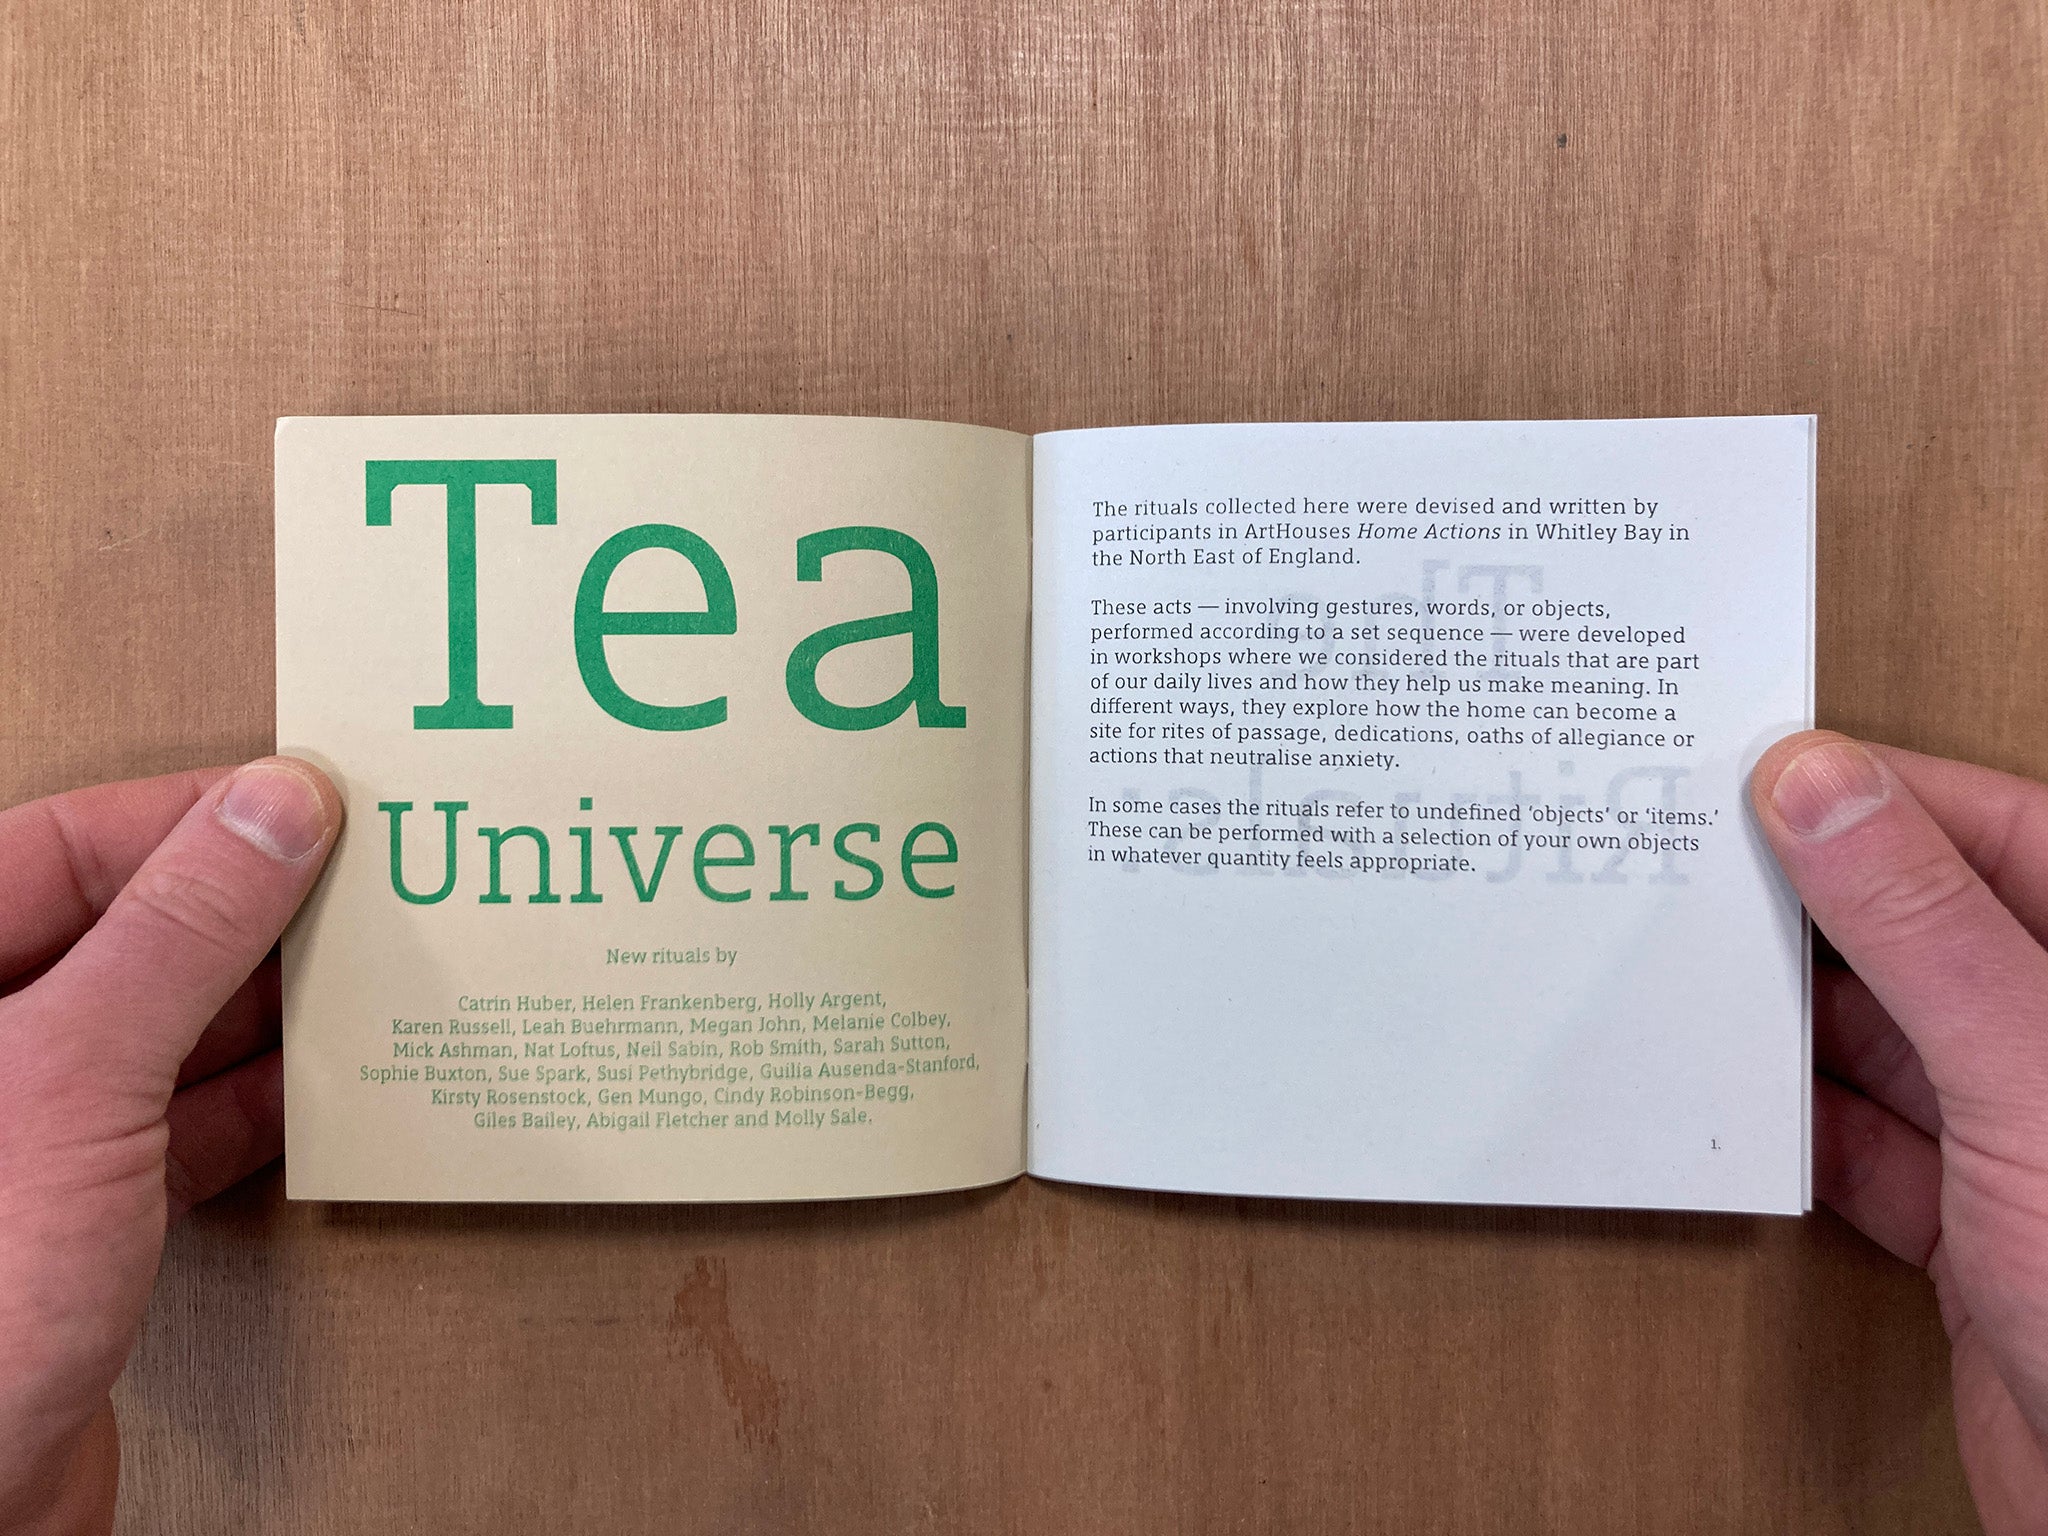 TEA UNIVERSE by Various Artists